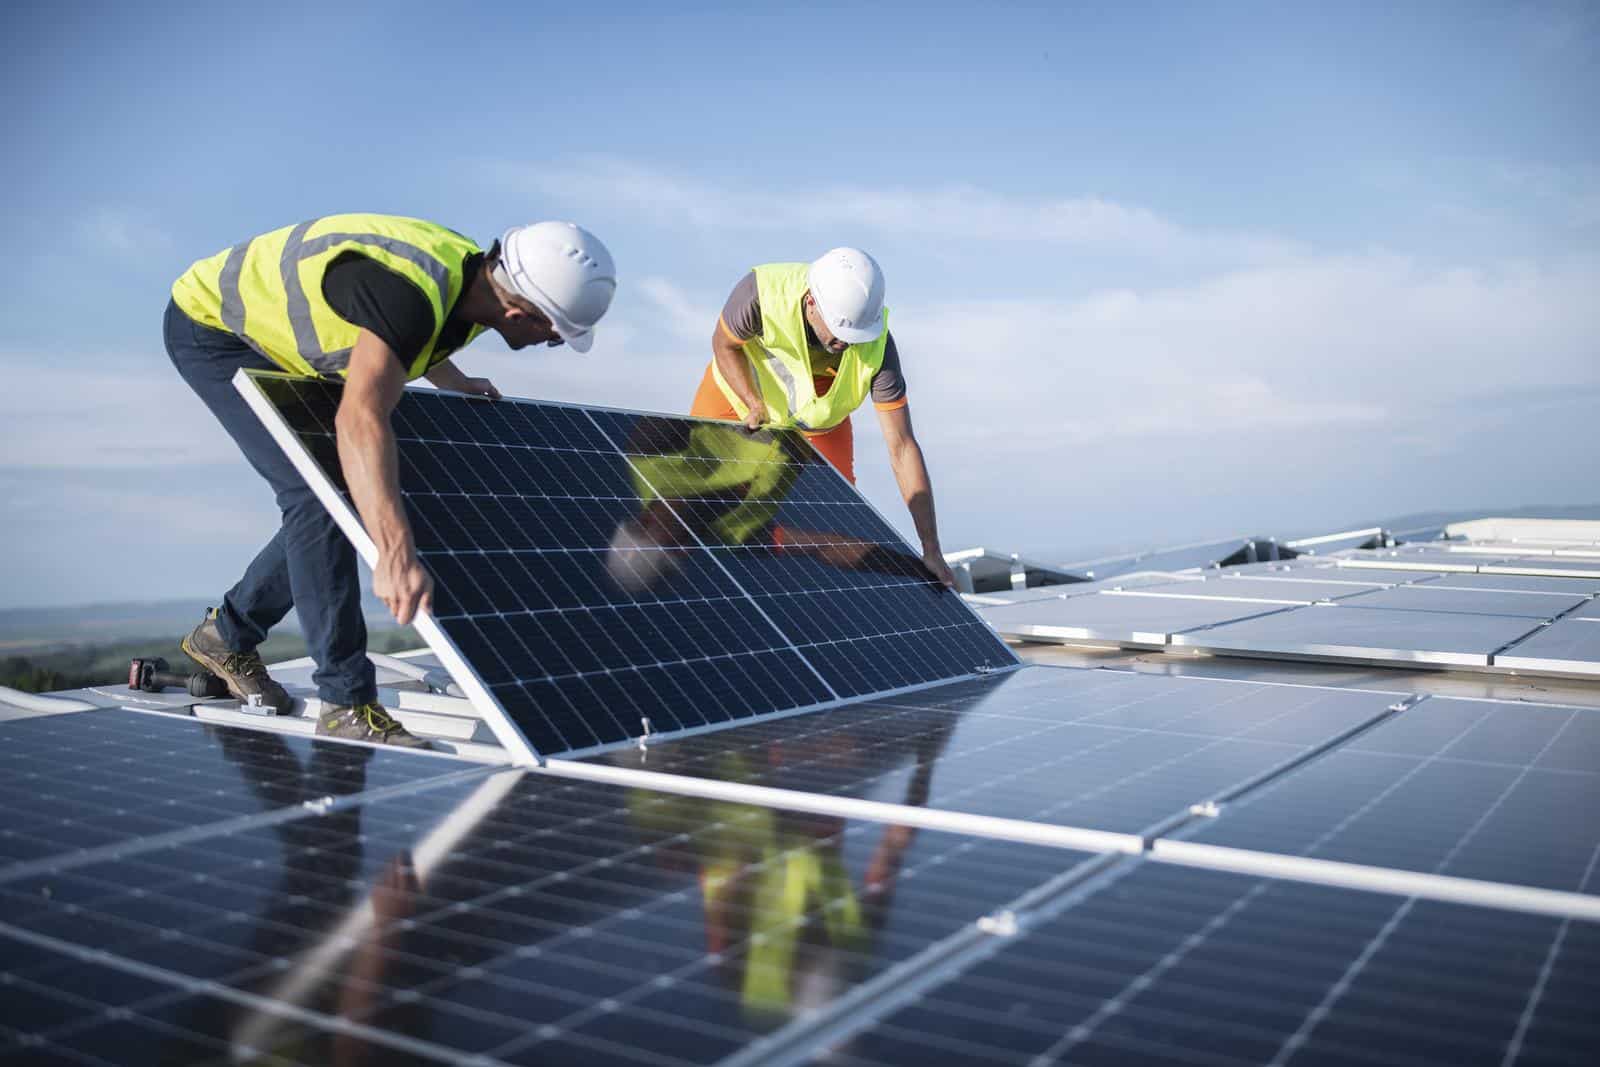 A team of two sustainability engineers installing solar panels on a roof.